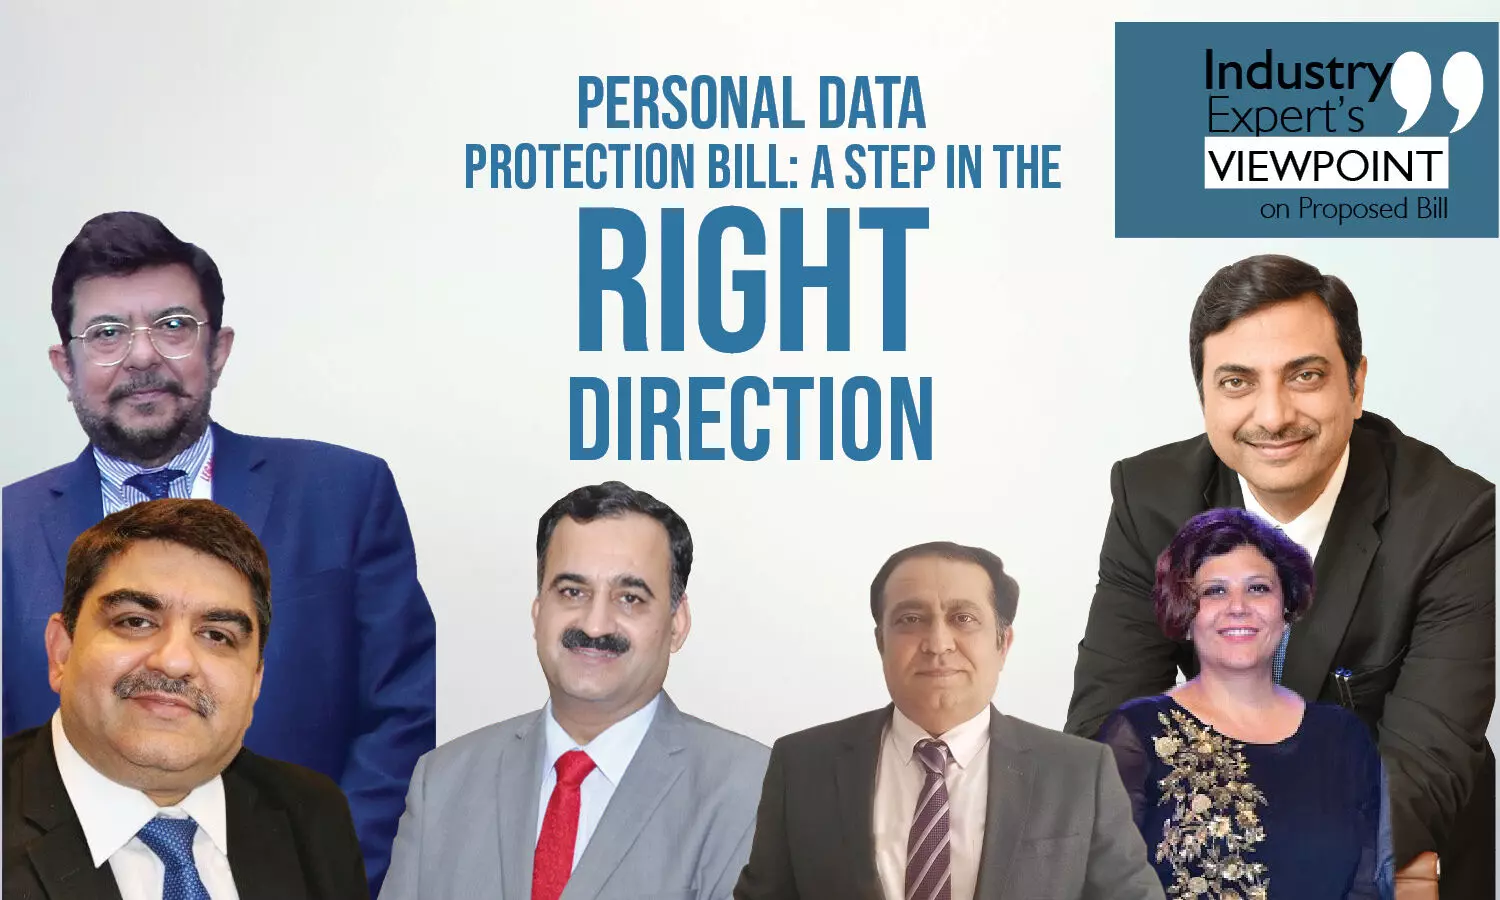 Personal Data Protection Bill a Step in The Right Direction